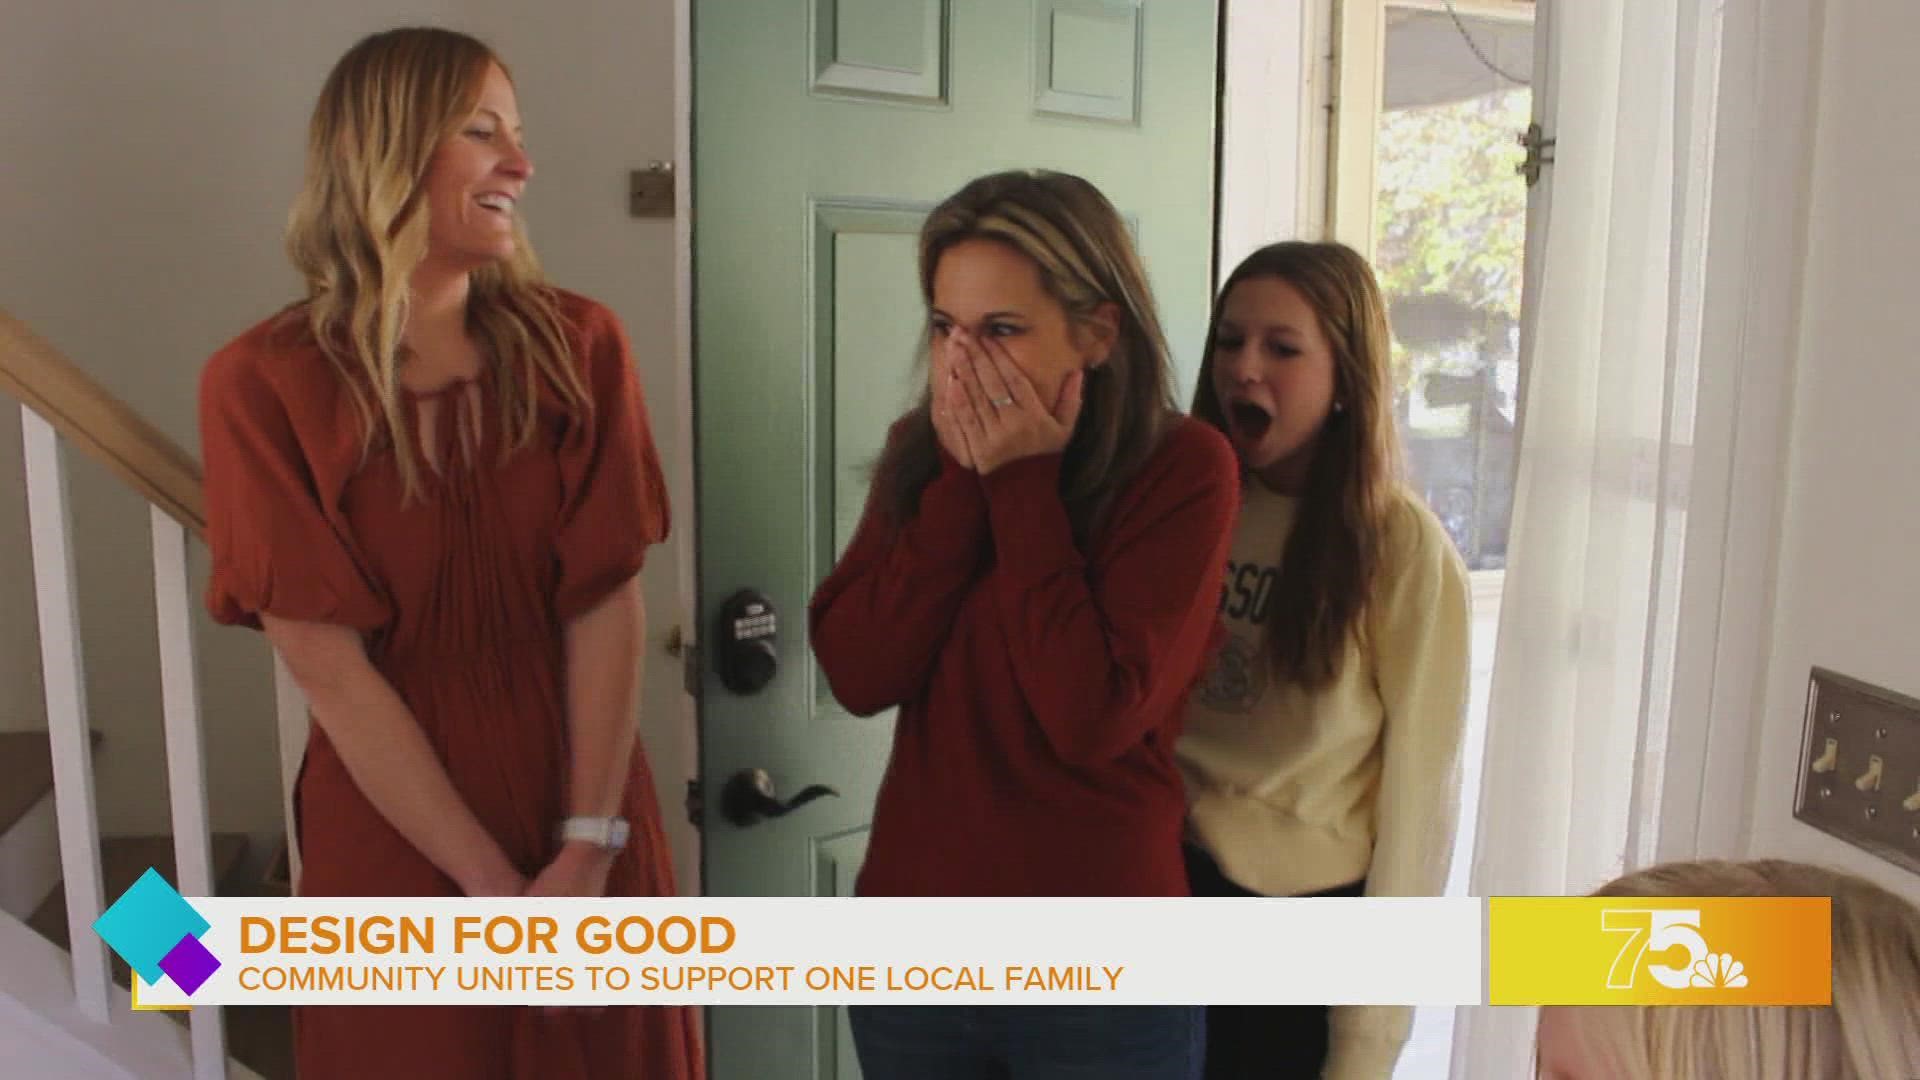 In an effort to turn one family’s year around, Stephanie and her team created ‘Design for Good’ where they give away a free room makeover to one deserving family.